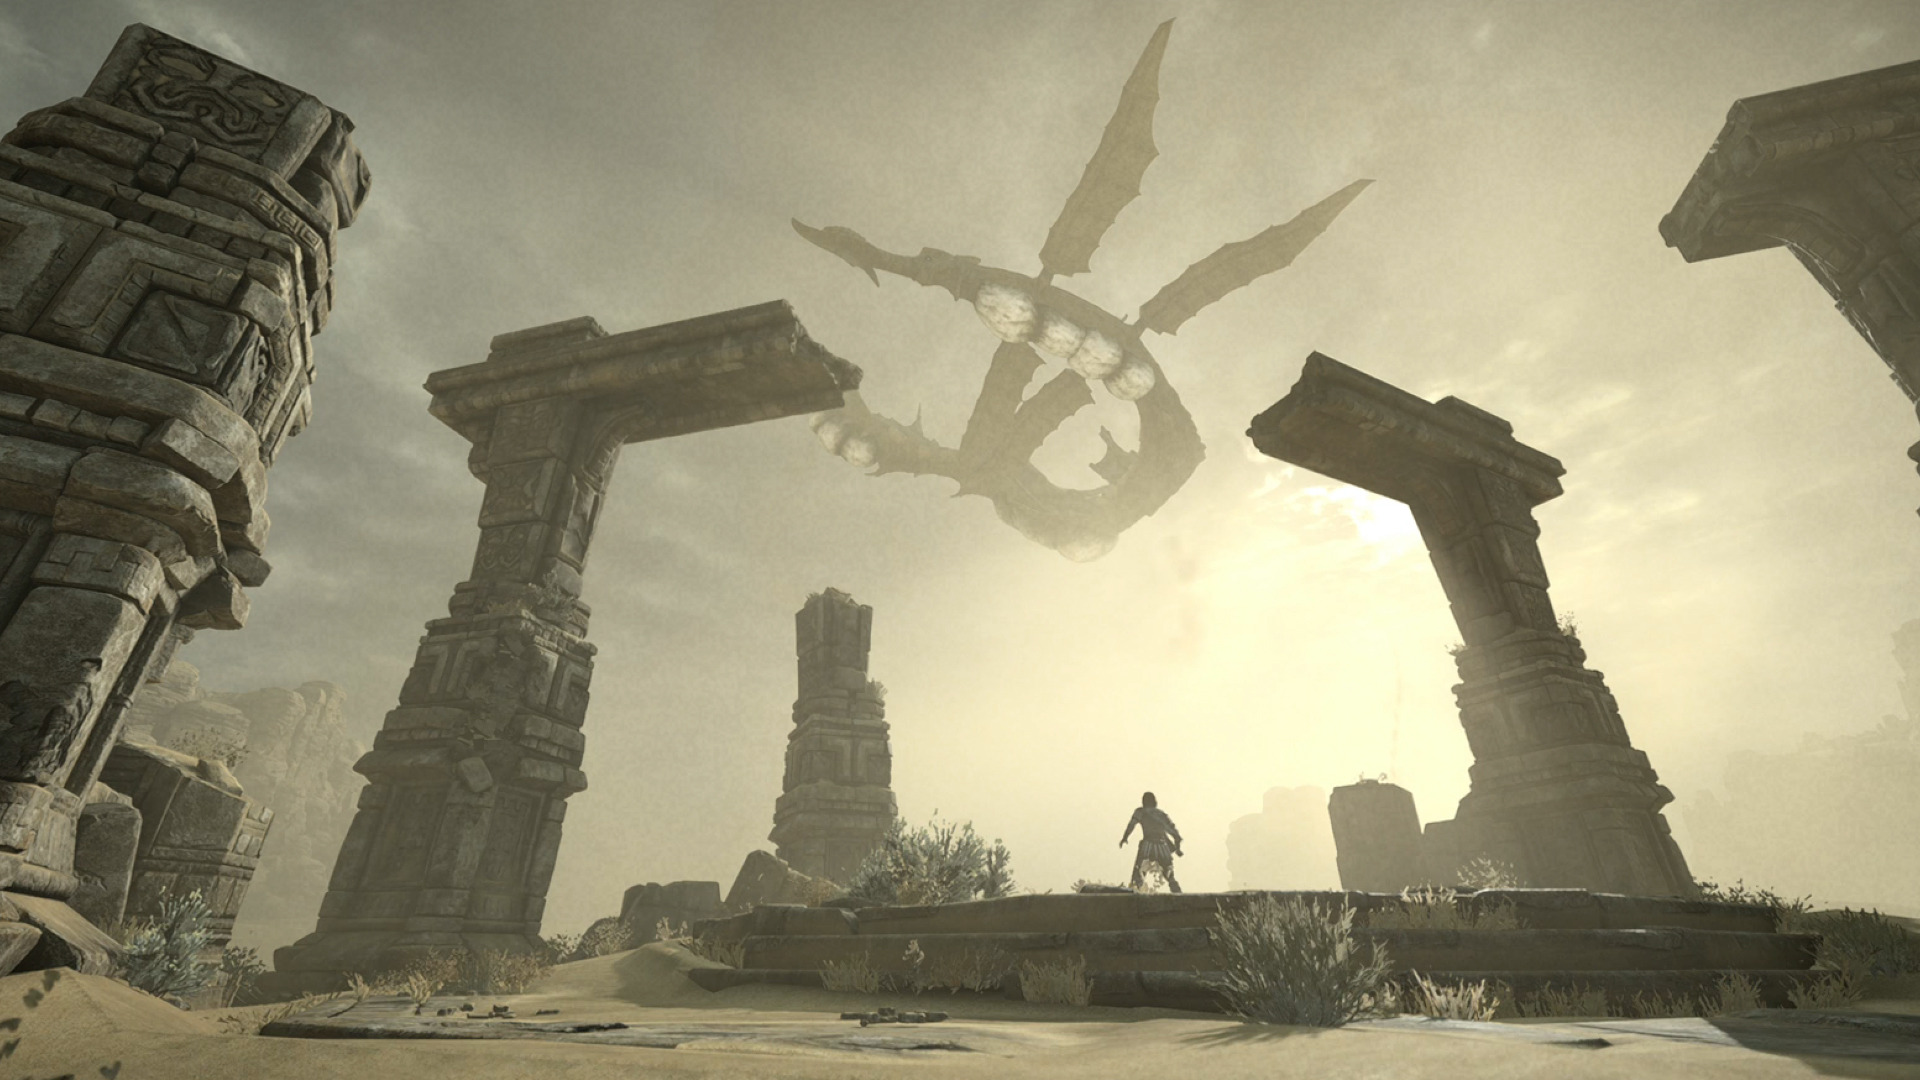 Shadow of the Colossus Review - GameSpot